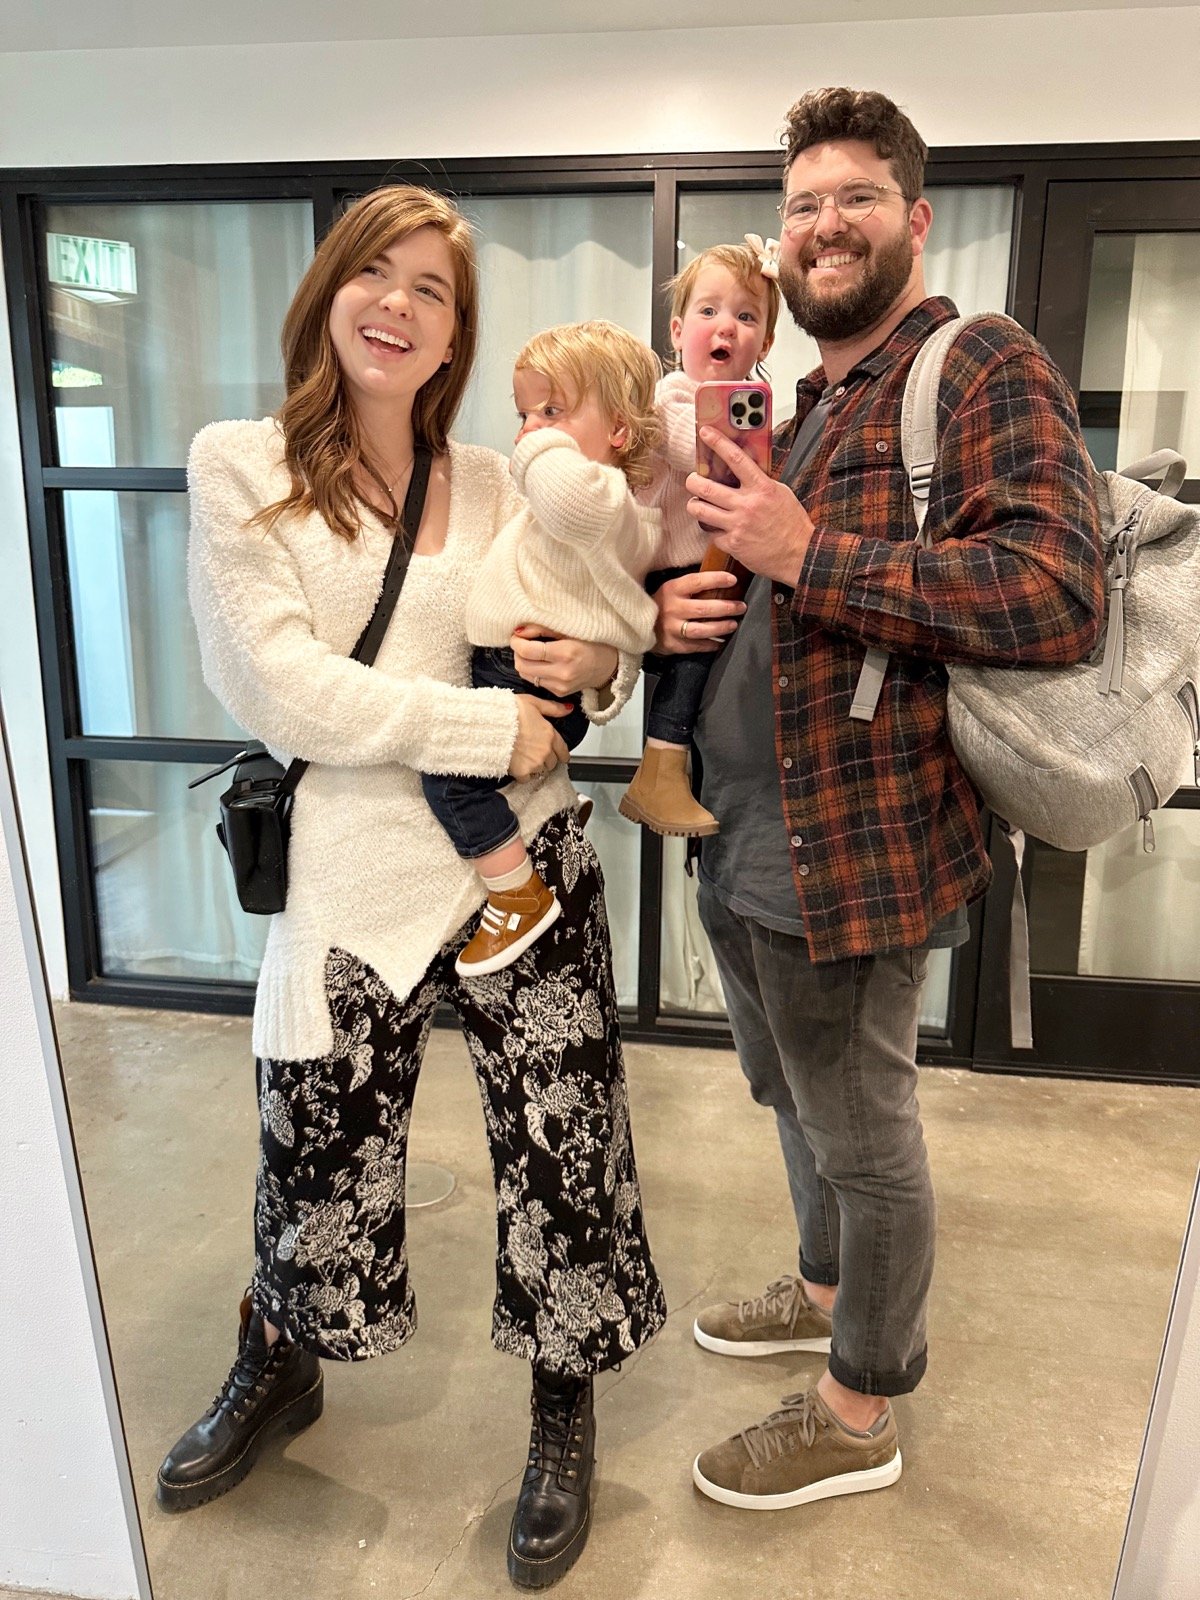 what to wear after having kids, what to wear, mom pooch, pouch, c-section, diastasis recti,tips for dressing after you have kids, lments of style, twins, buru, show me your mumu, doc marten